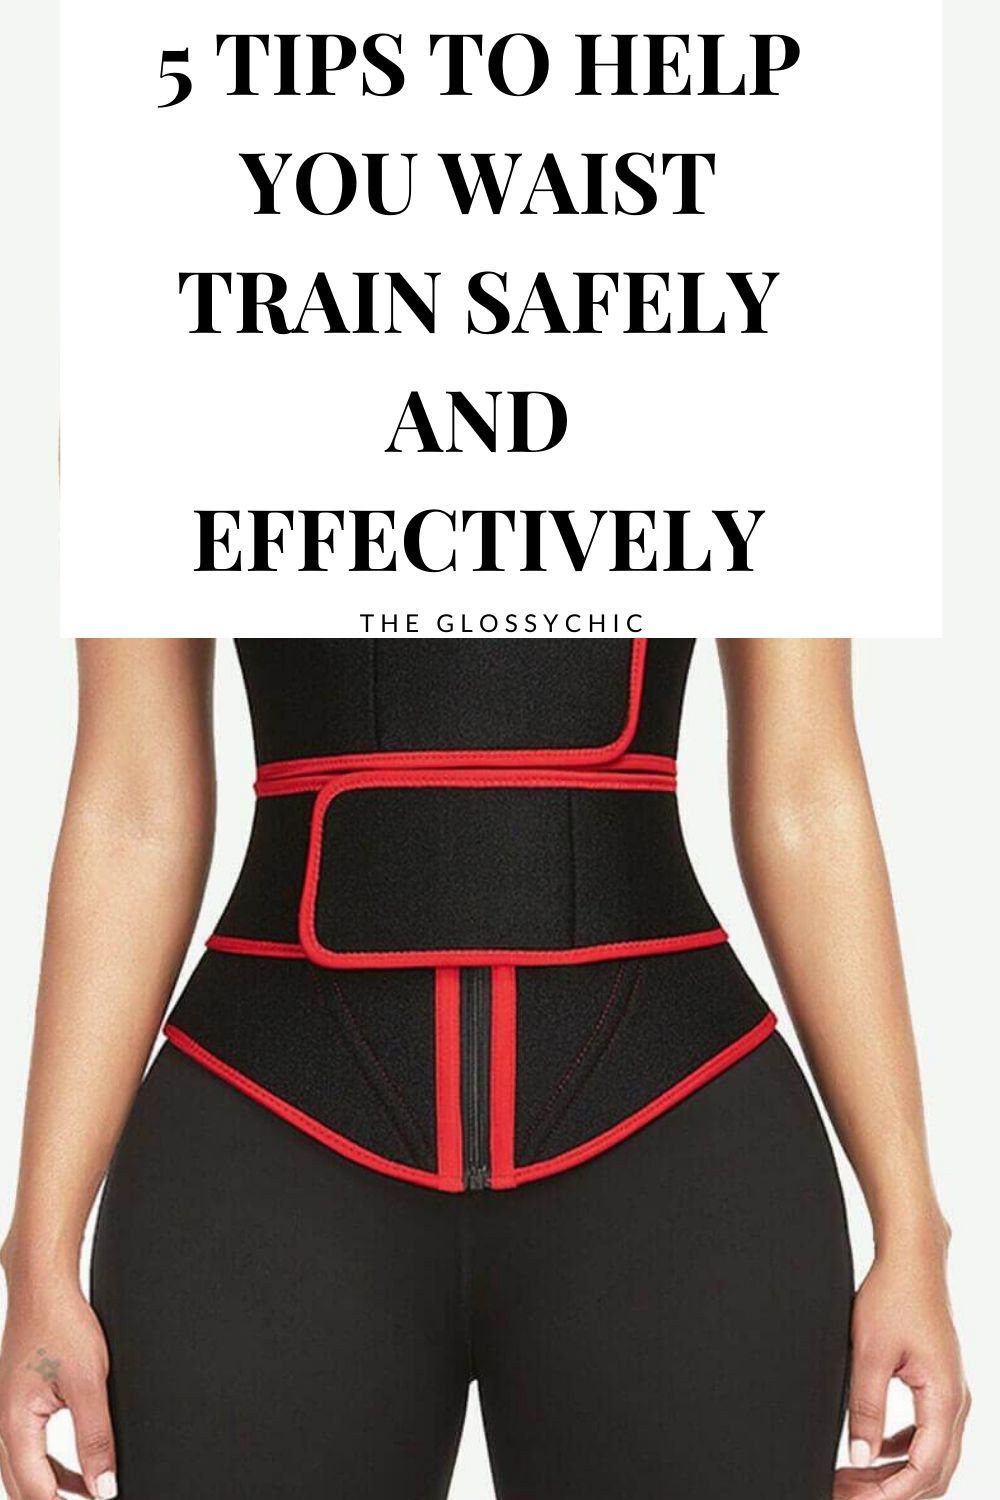 5 tips to help you waist train safely and effectively